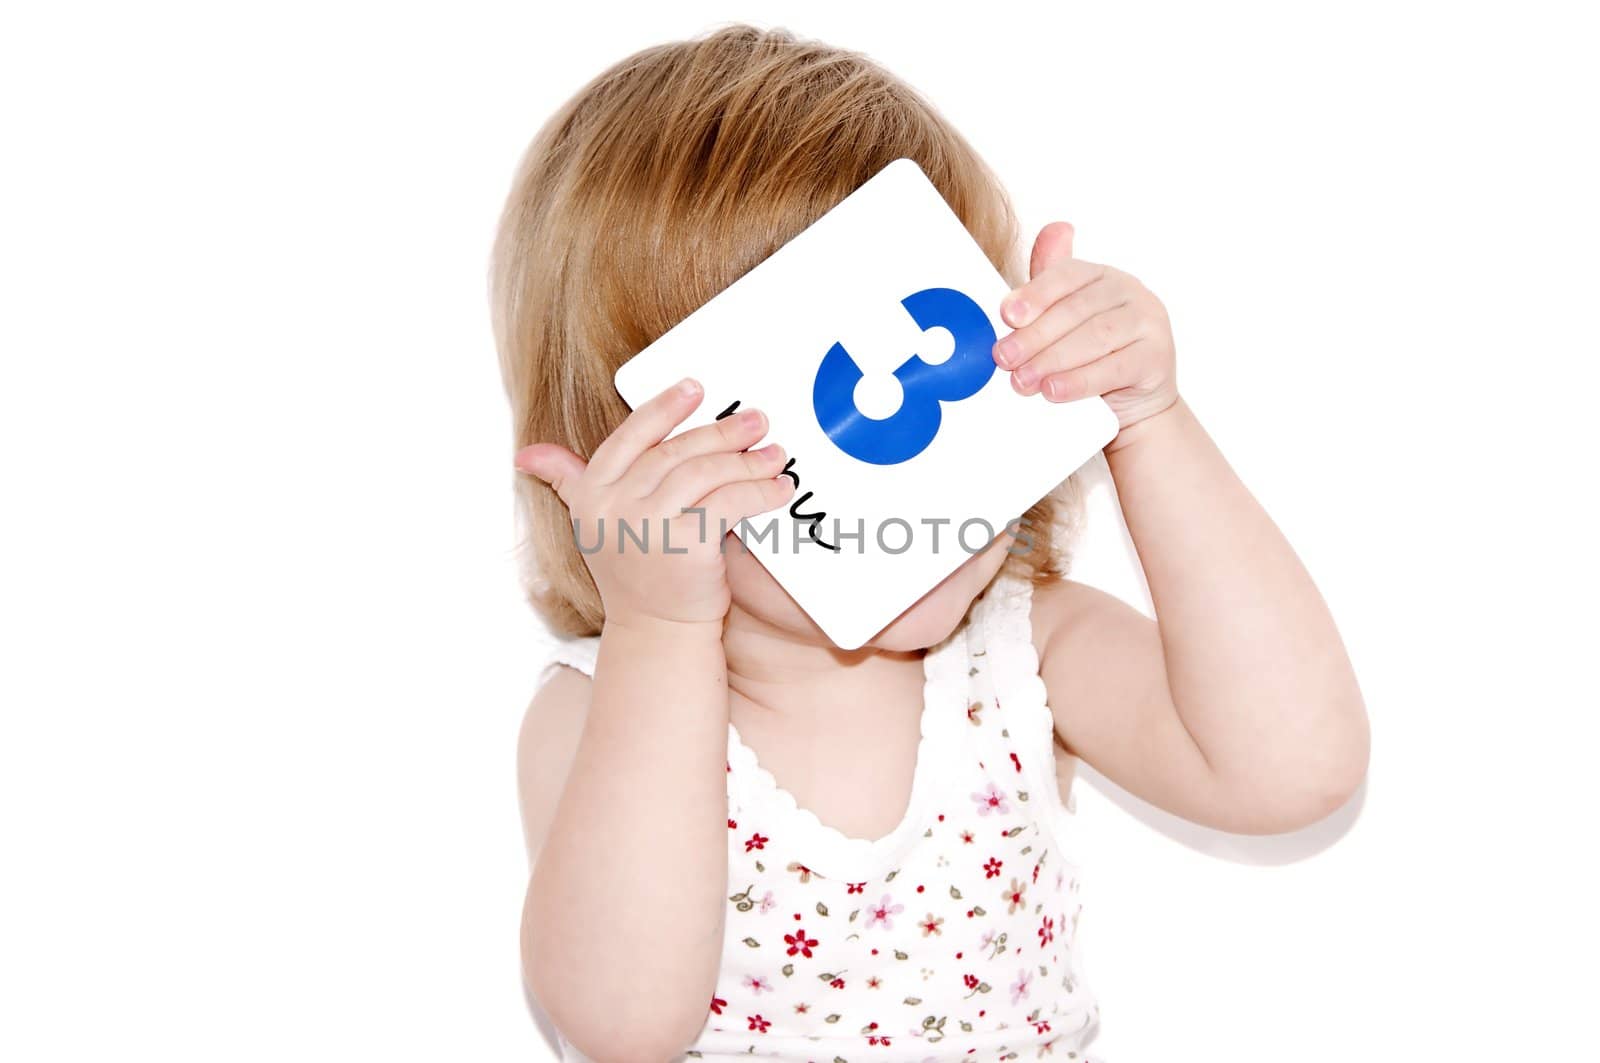 The child learns figure three on a white background